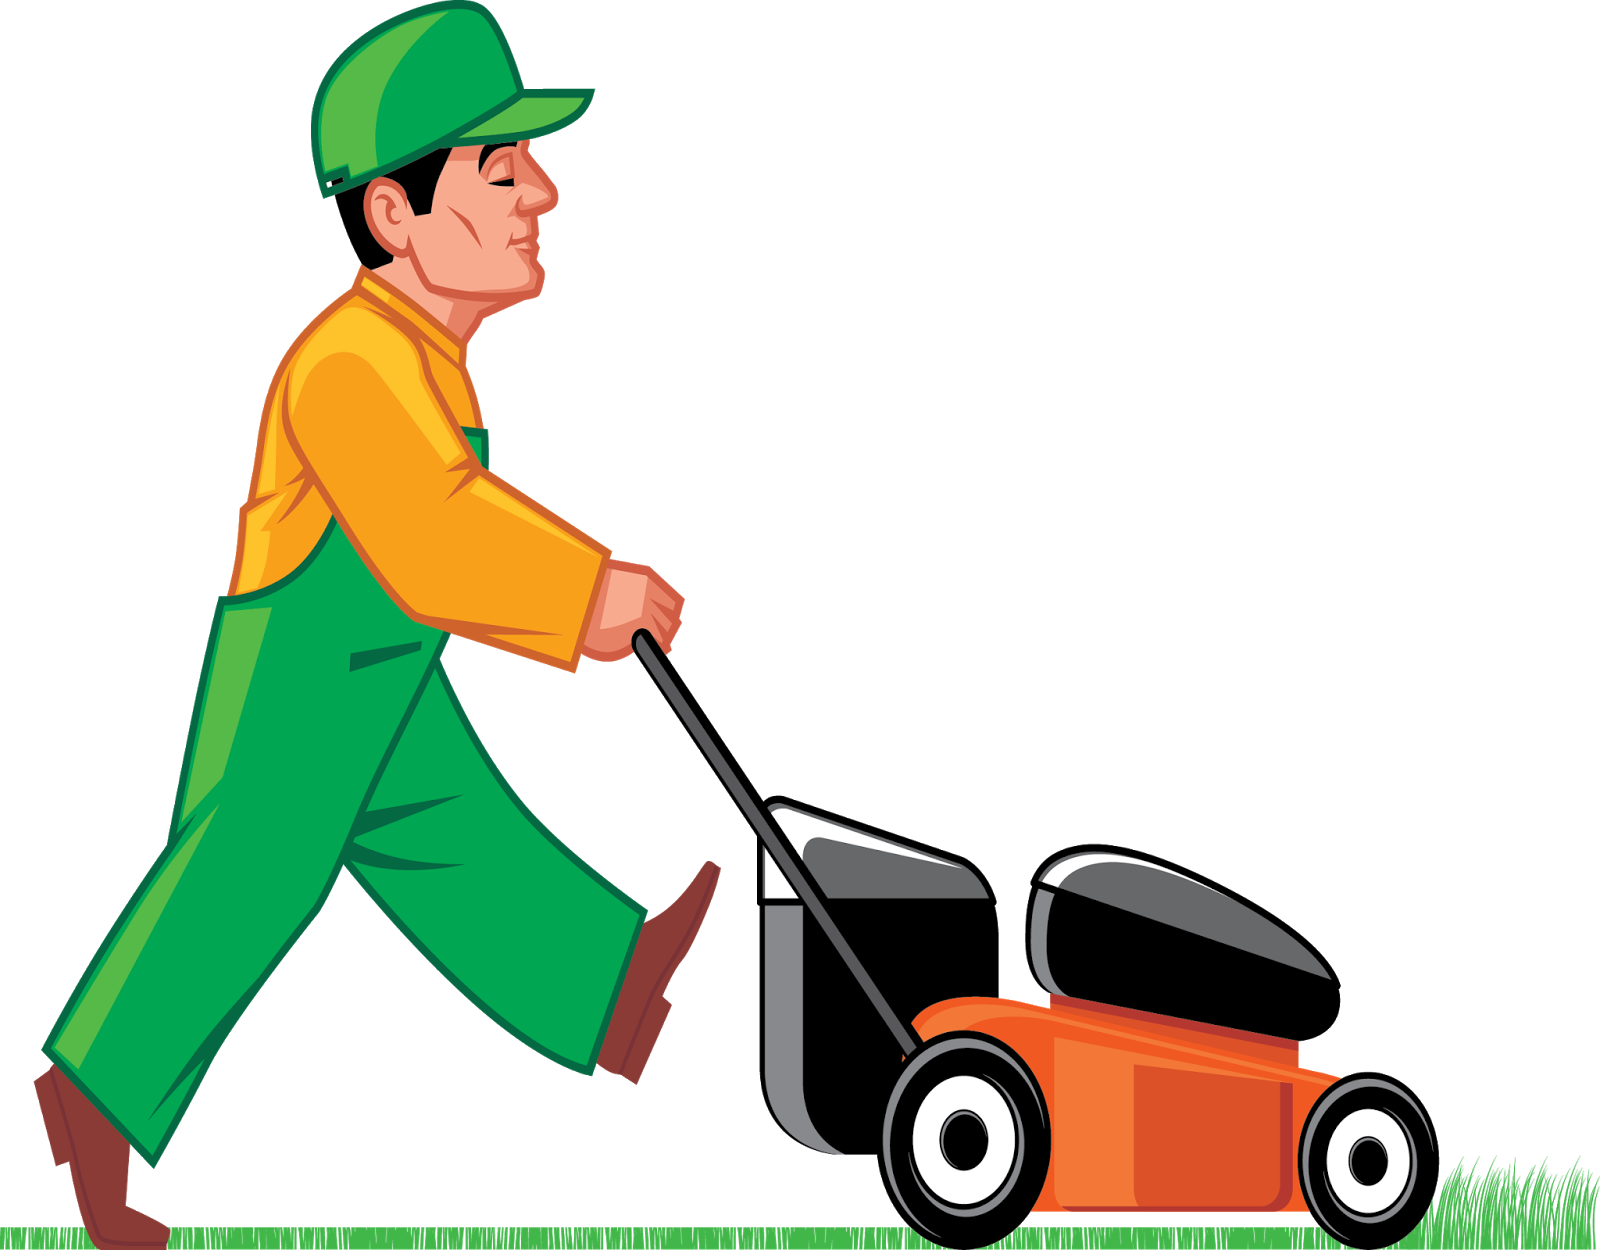 Mowing lawn equipment